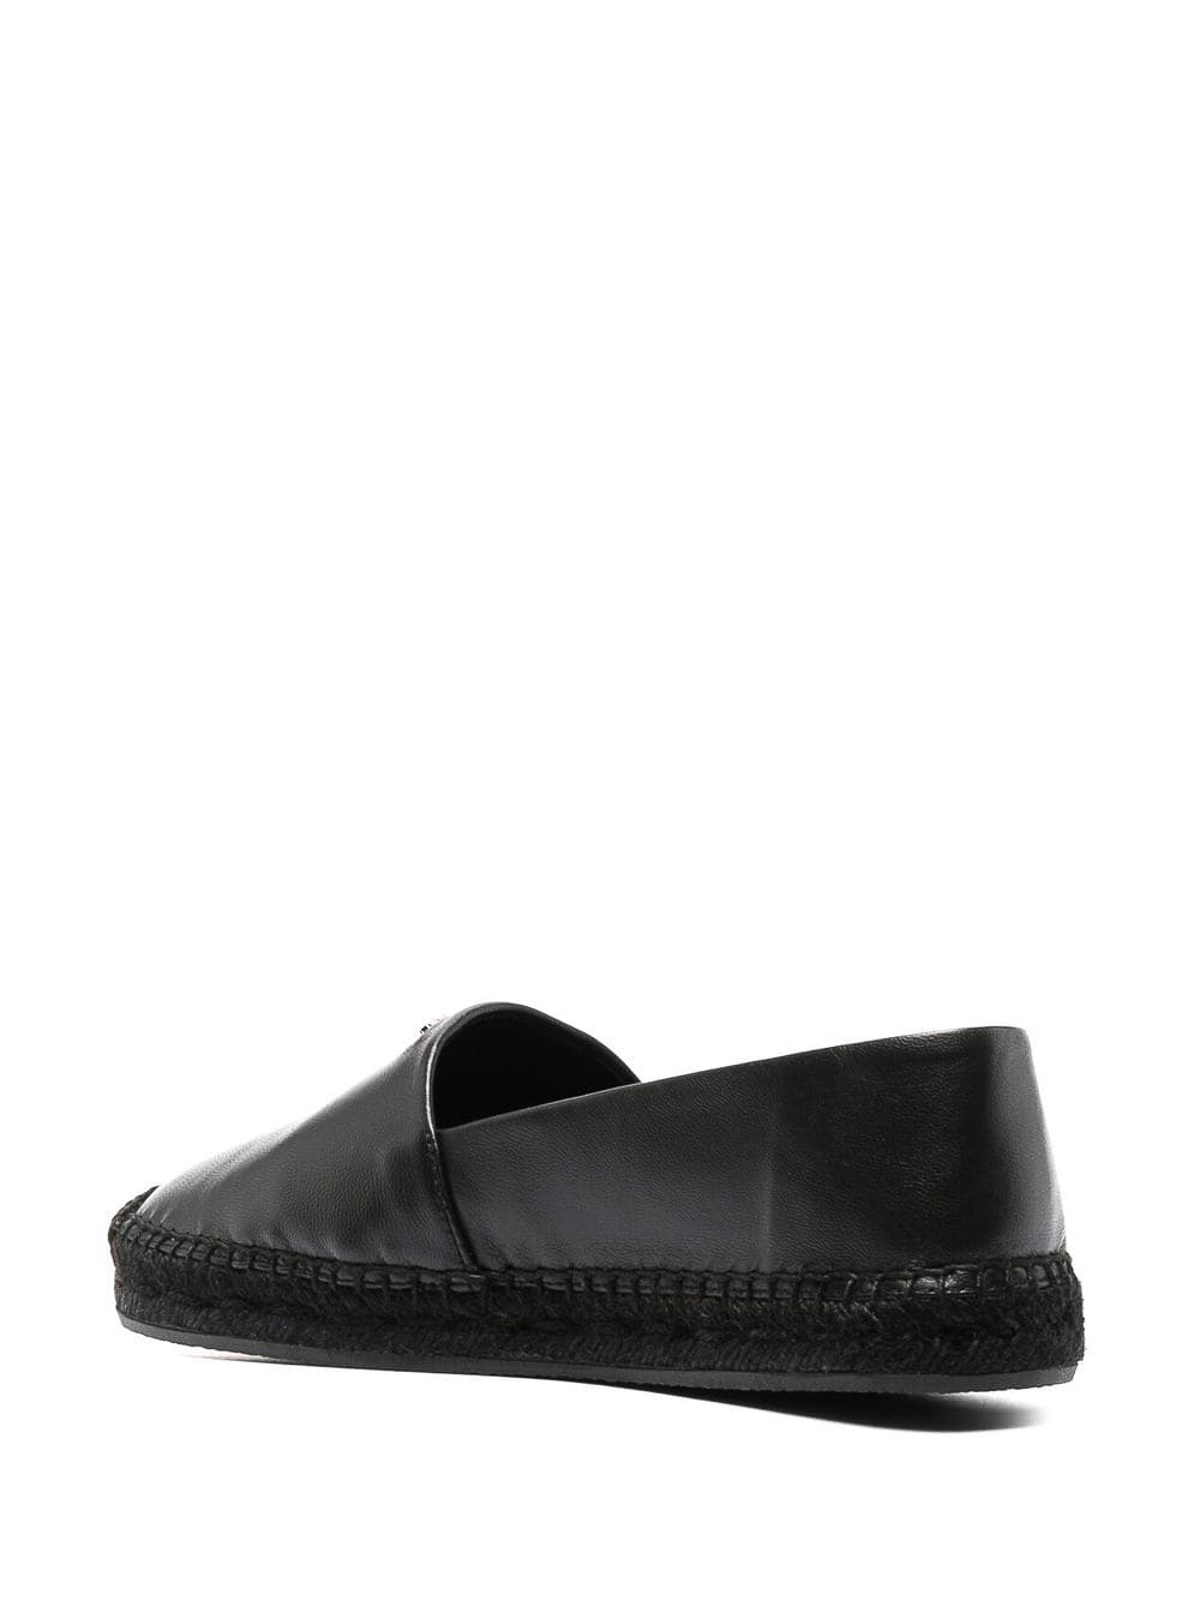 GIVENCHY - Leather Espadrilles